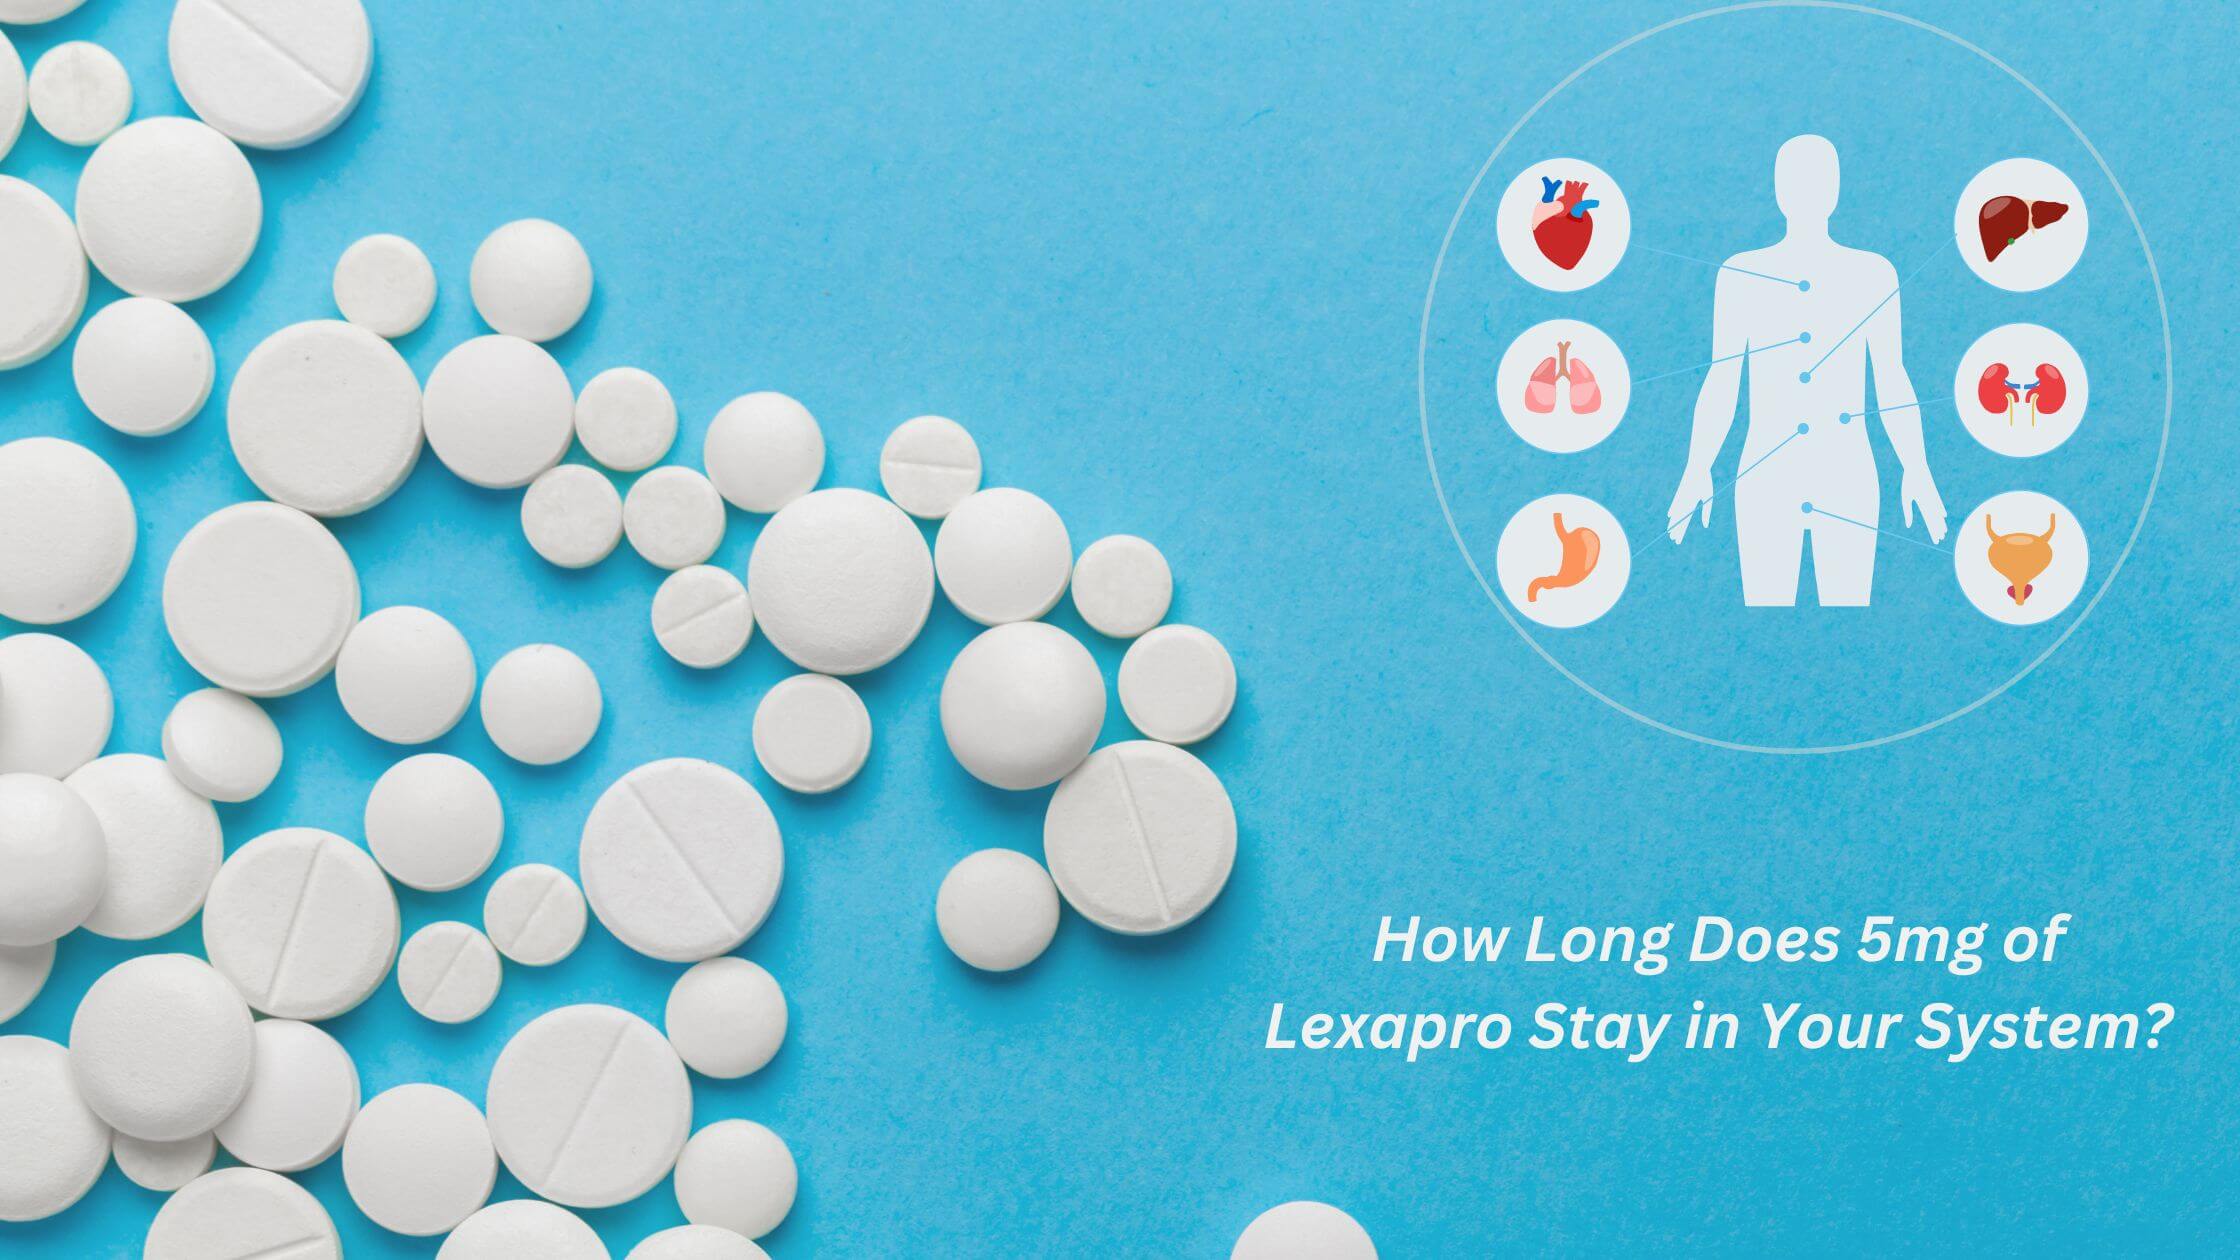 How long does 5 mg of lexapro stay in your system